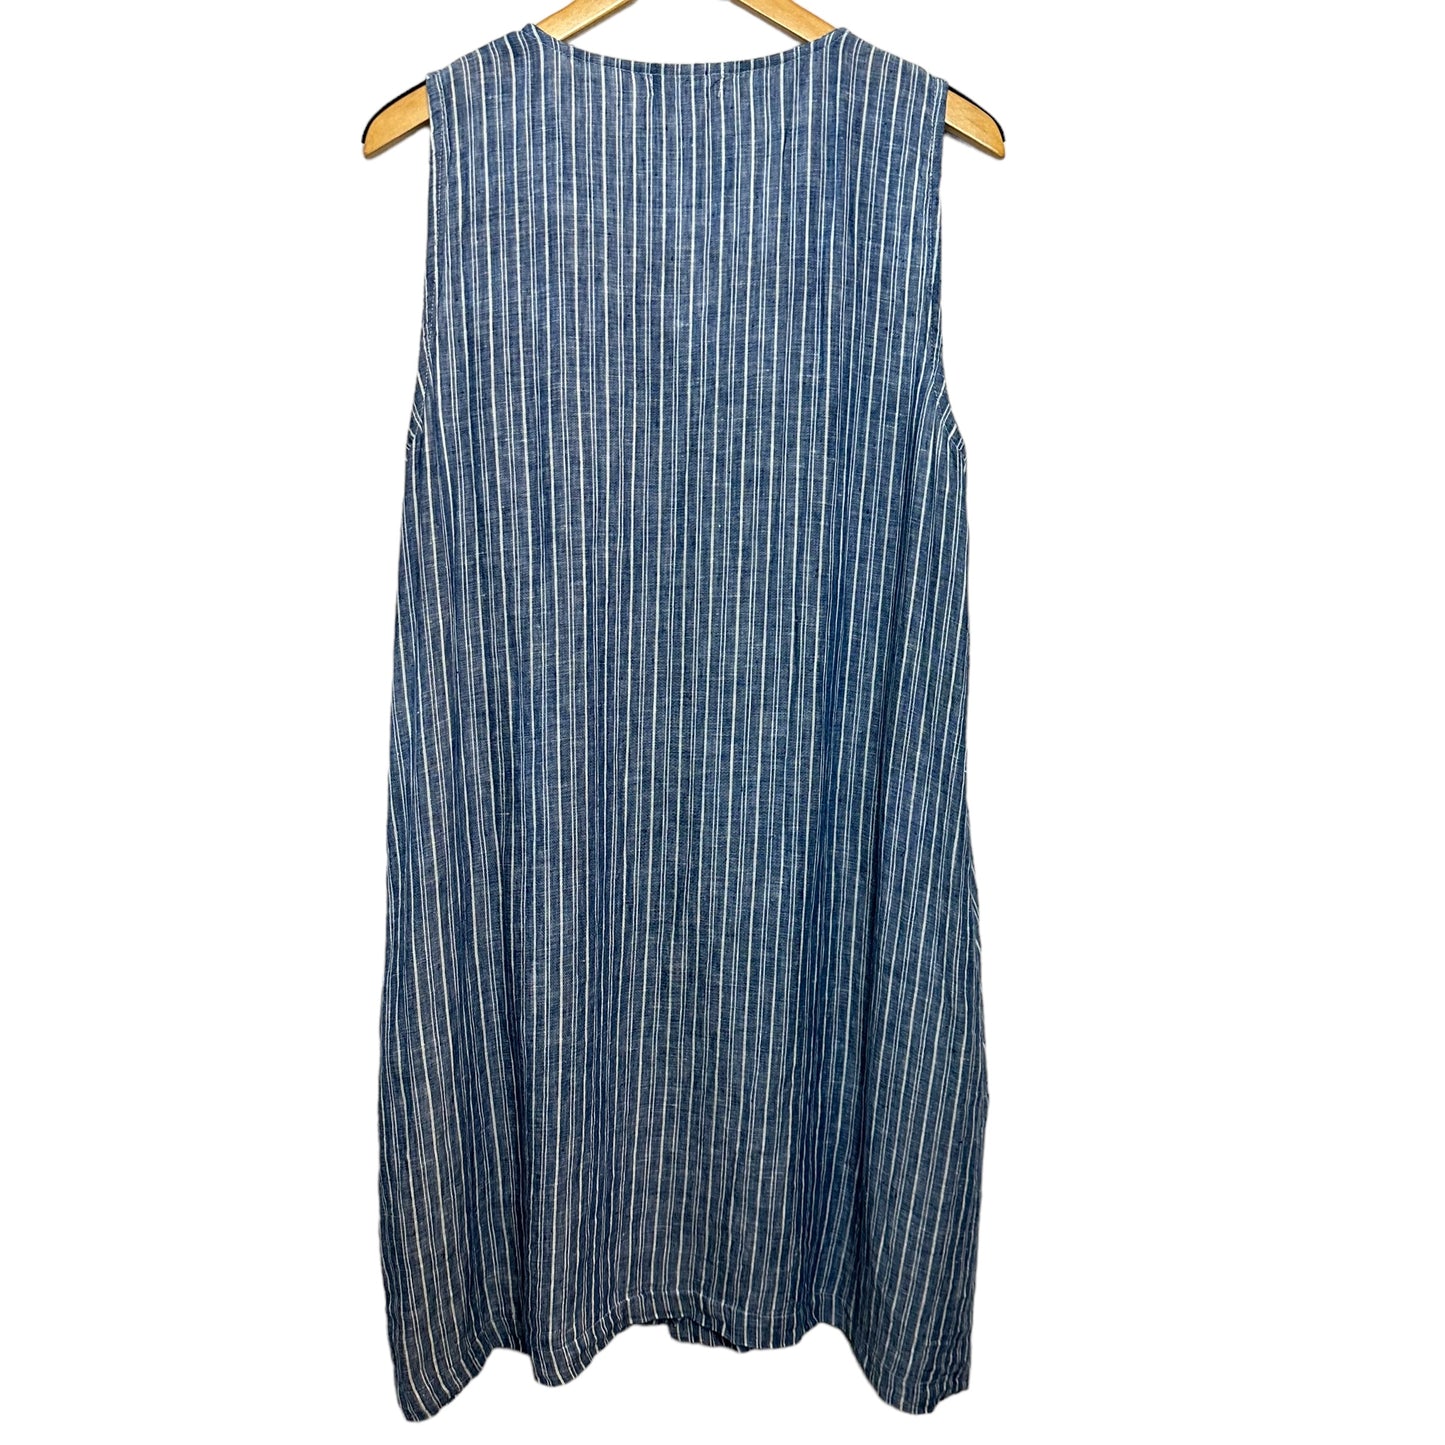 CP Shades Blue and White Striped Linen Midi Shirtdress Sleeveless Large